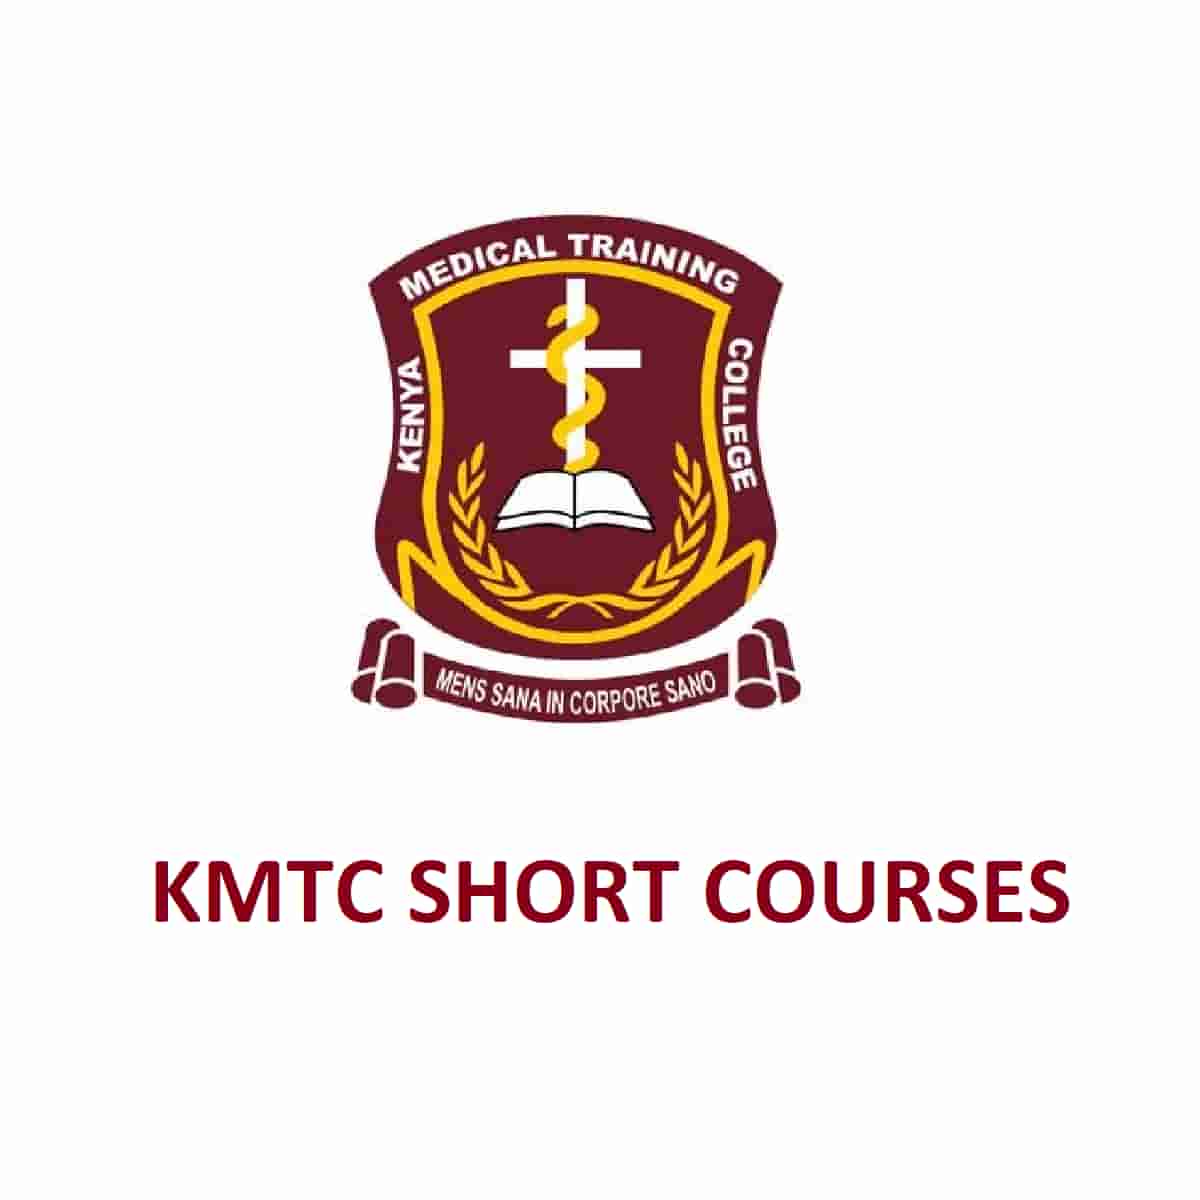 KMTC Short Courses and their Requirements